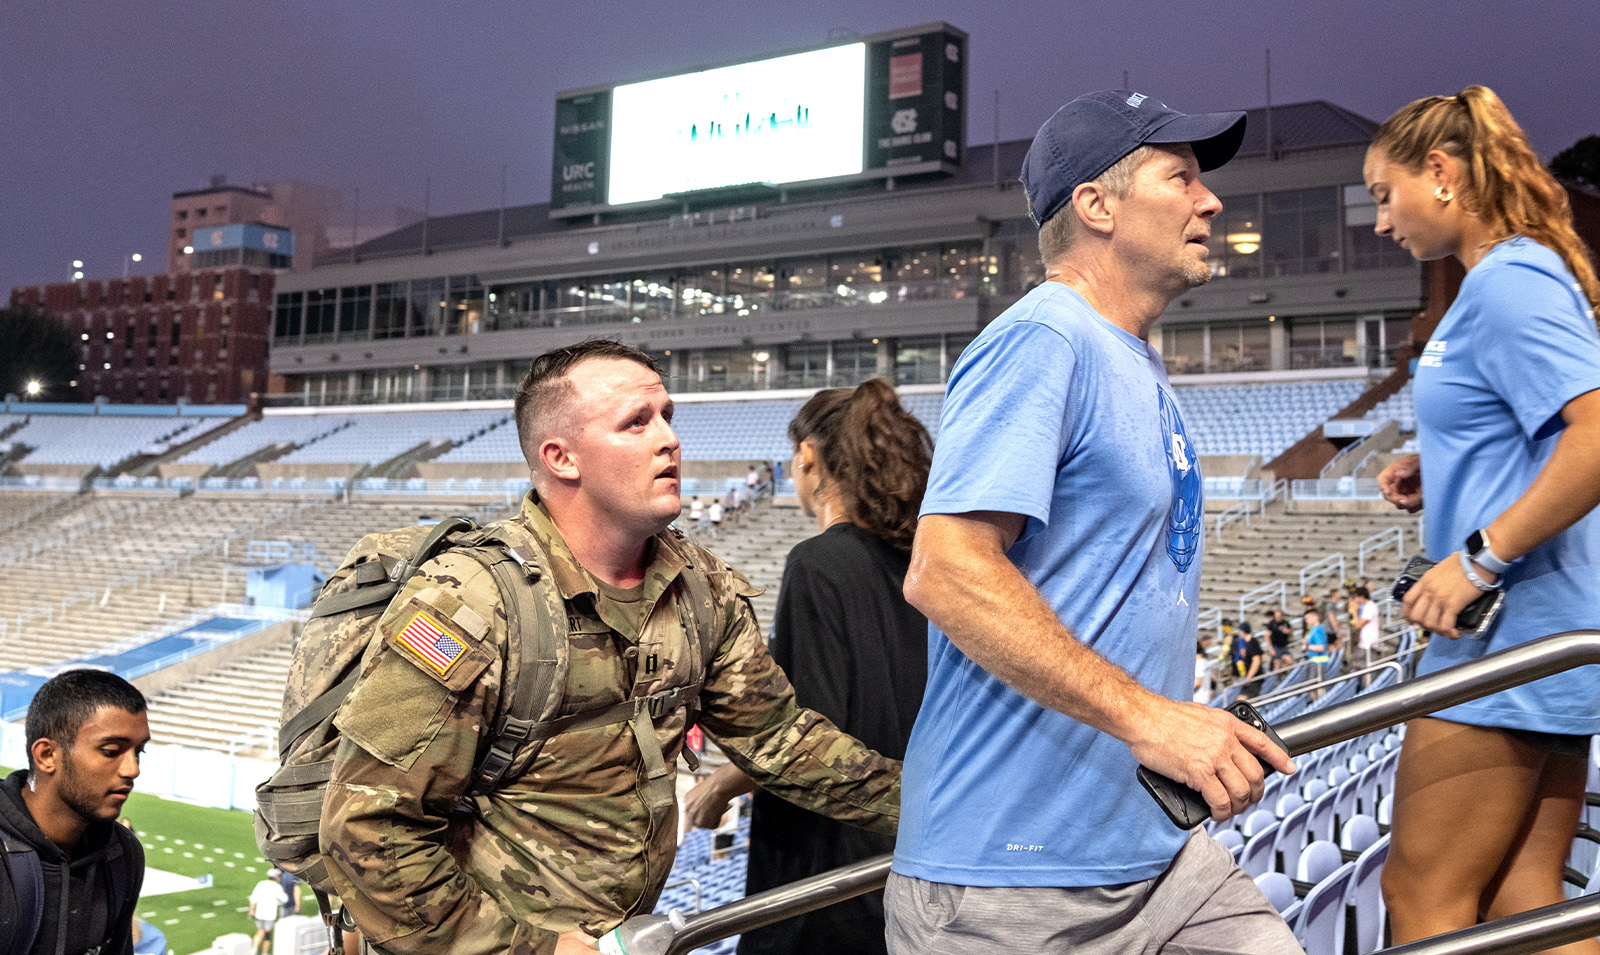 Chancellor Kevin M. Guskiewicz running stadium stairs as part of a 9/11 remebrance event at Kenan Stadium on the campus of UNC-Chapel Hill.